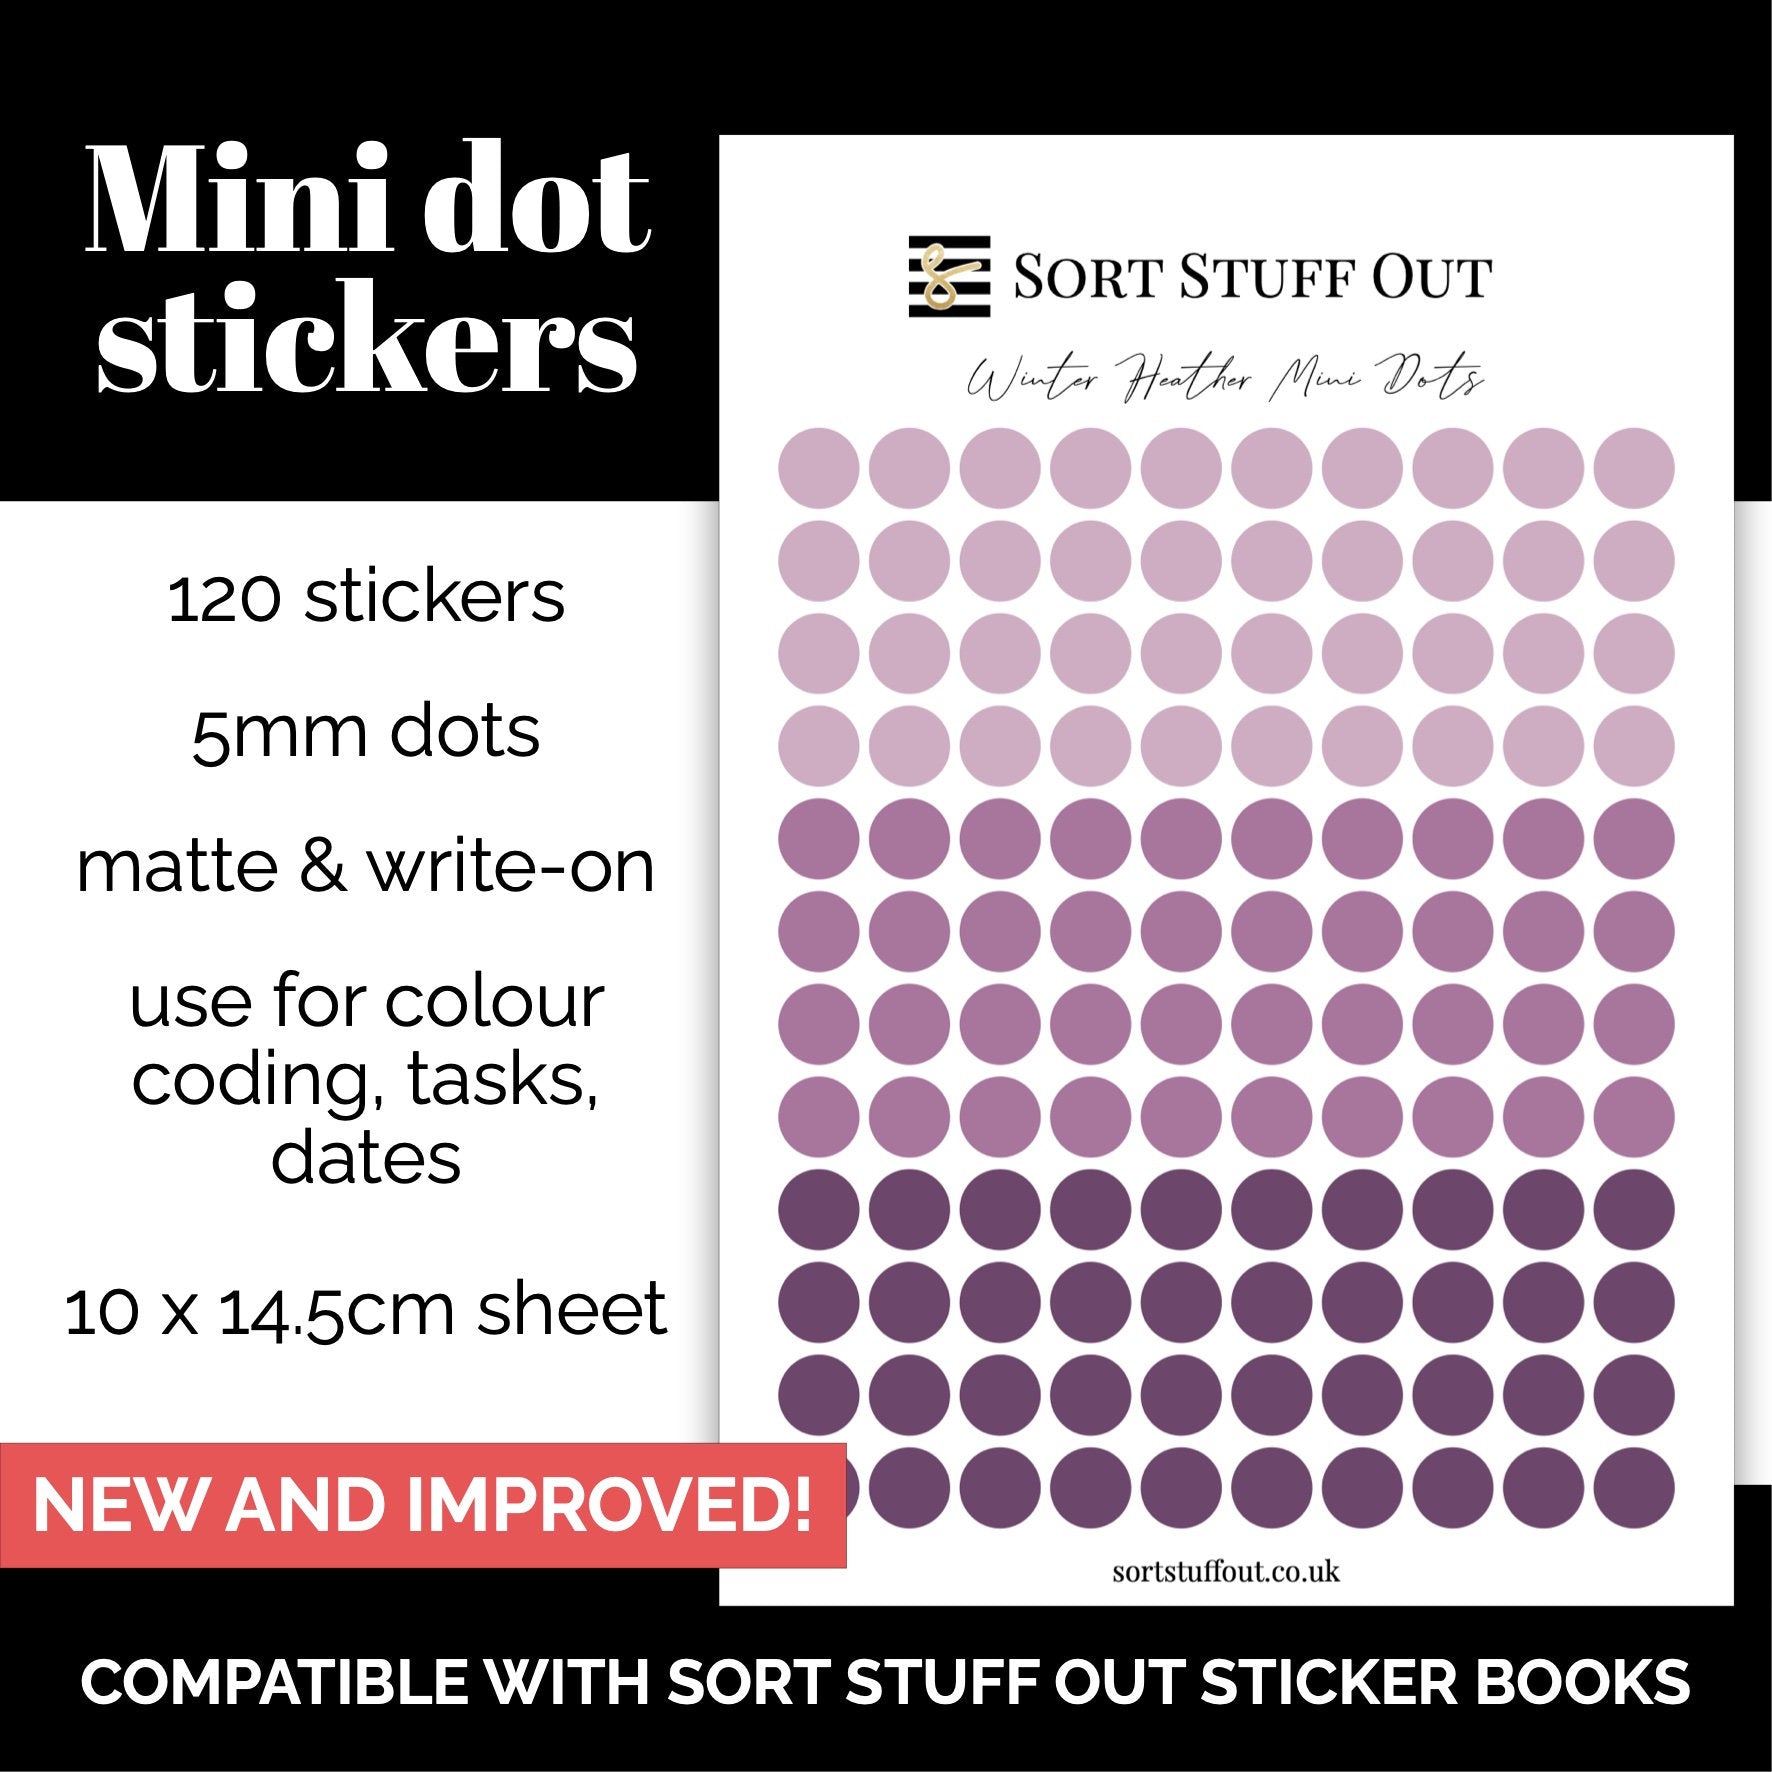 NEW Winter Heather Mini Dot Stickers - Option to Include Sticker Book Extras - Functional Planner Stickers